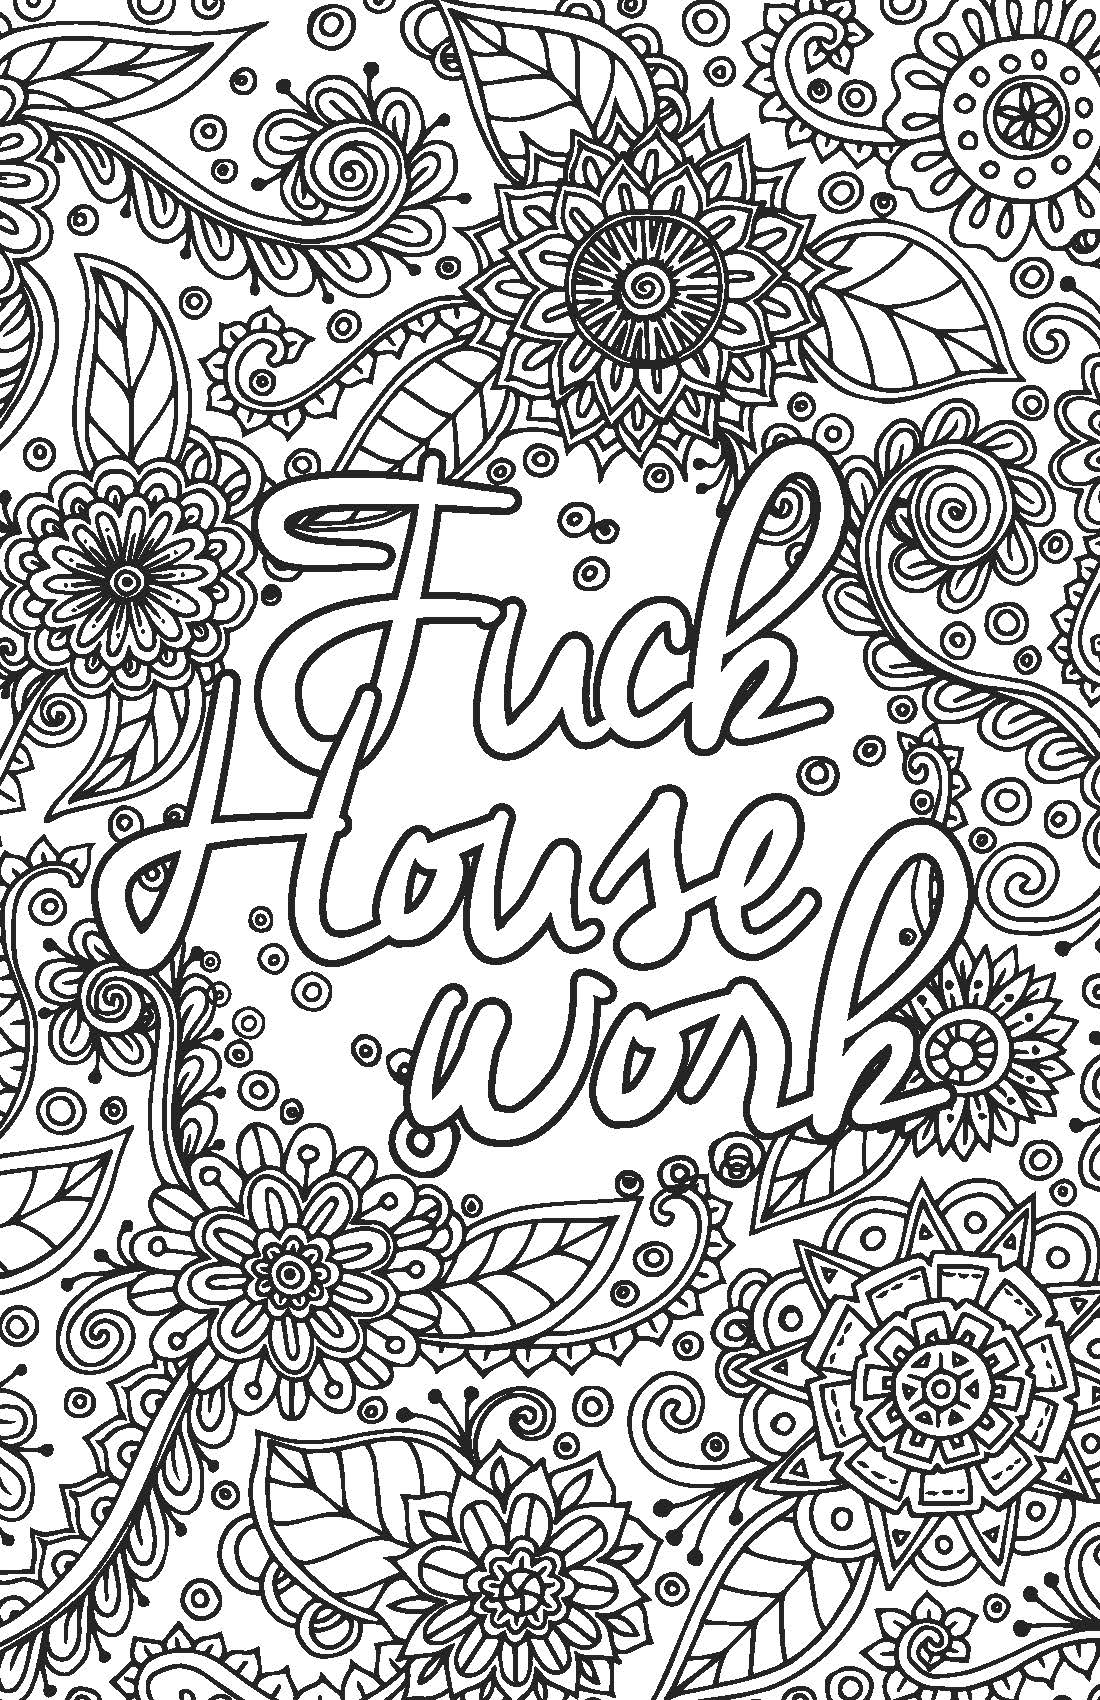 55+ Adult Coloring Pages Finished to Perfection - #7 is Stunning 163